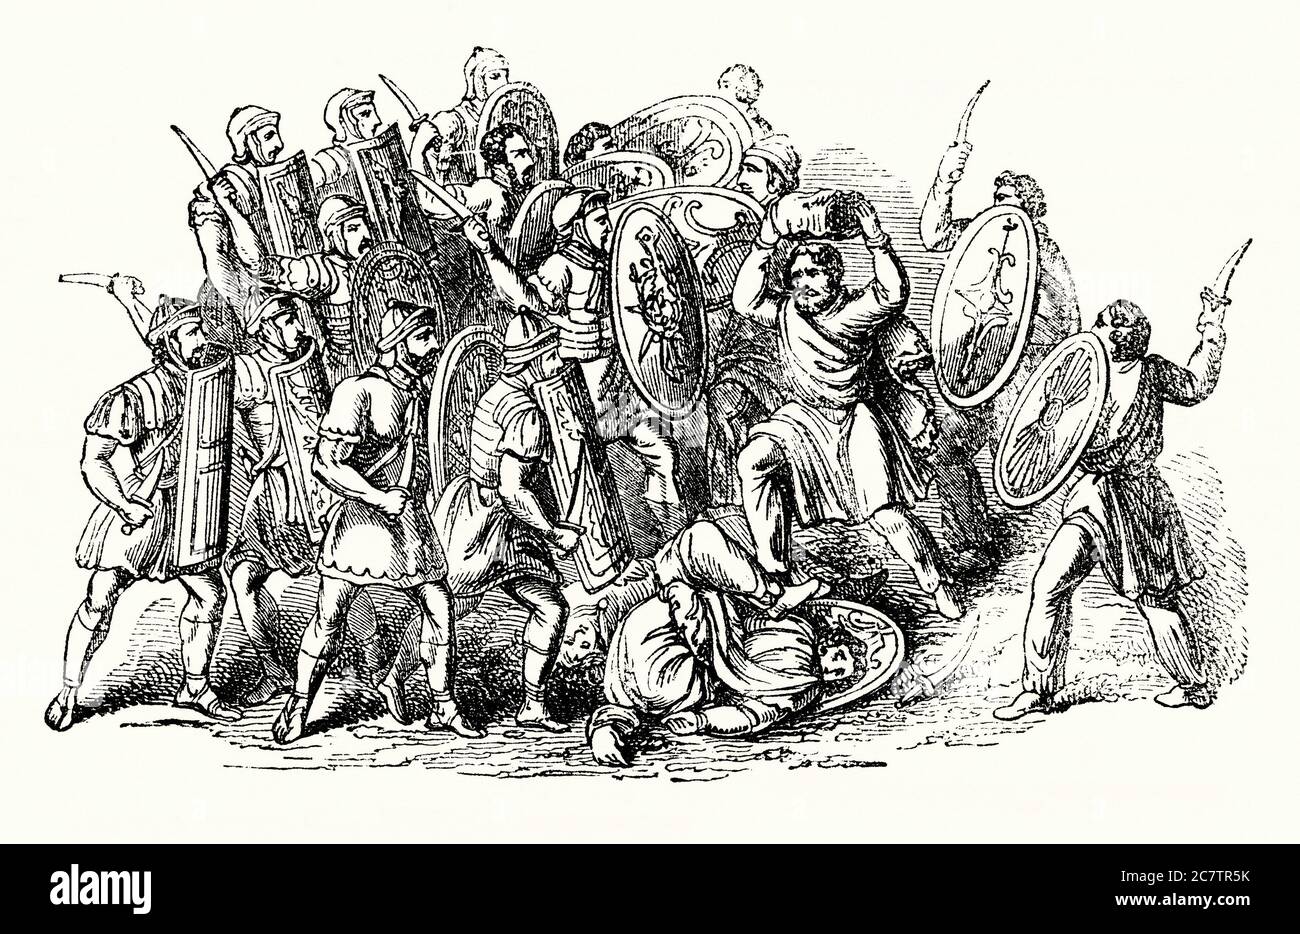 An old engraving showing a battle between soldiers of the Roman Empire and Barbarians, Europe during the 1st century AD. Warfare between the Romans and various Germanic tribes lasted between 113 BC and 596 AD. The nature of these wars varied through time between Roman conquest, Germanic uprisings and later Germanic invasions in the Roman Empire that started in the late second century BC. The word 'Barbarian' has become commonly used to refer to someone perceived to be either uncivilised or primitive. Stock Photo